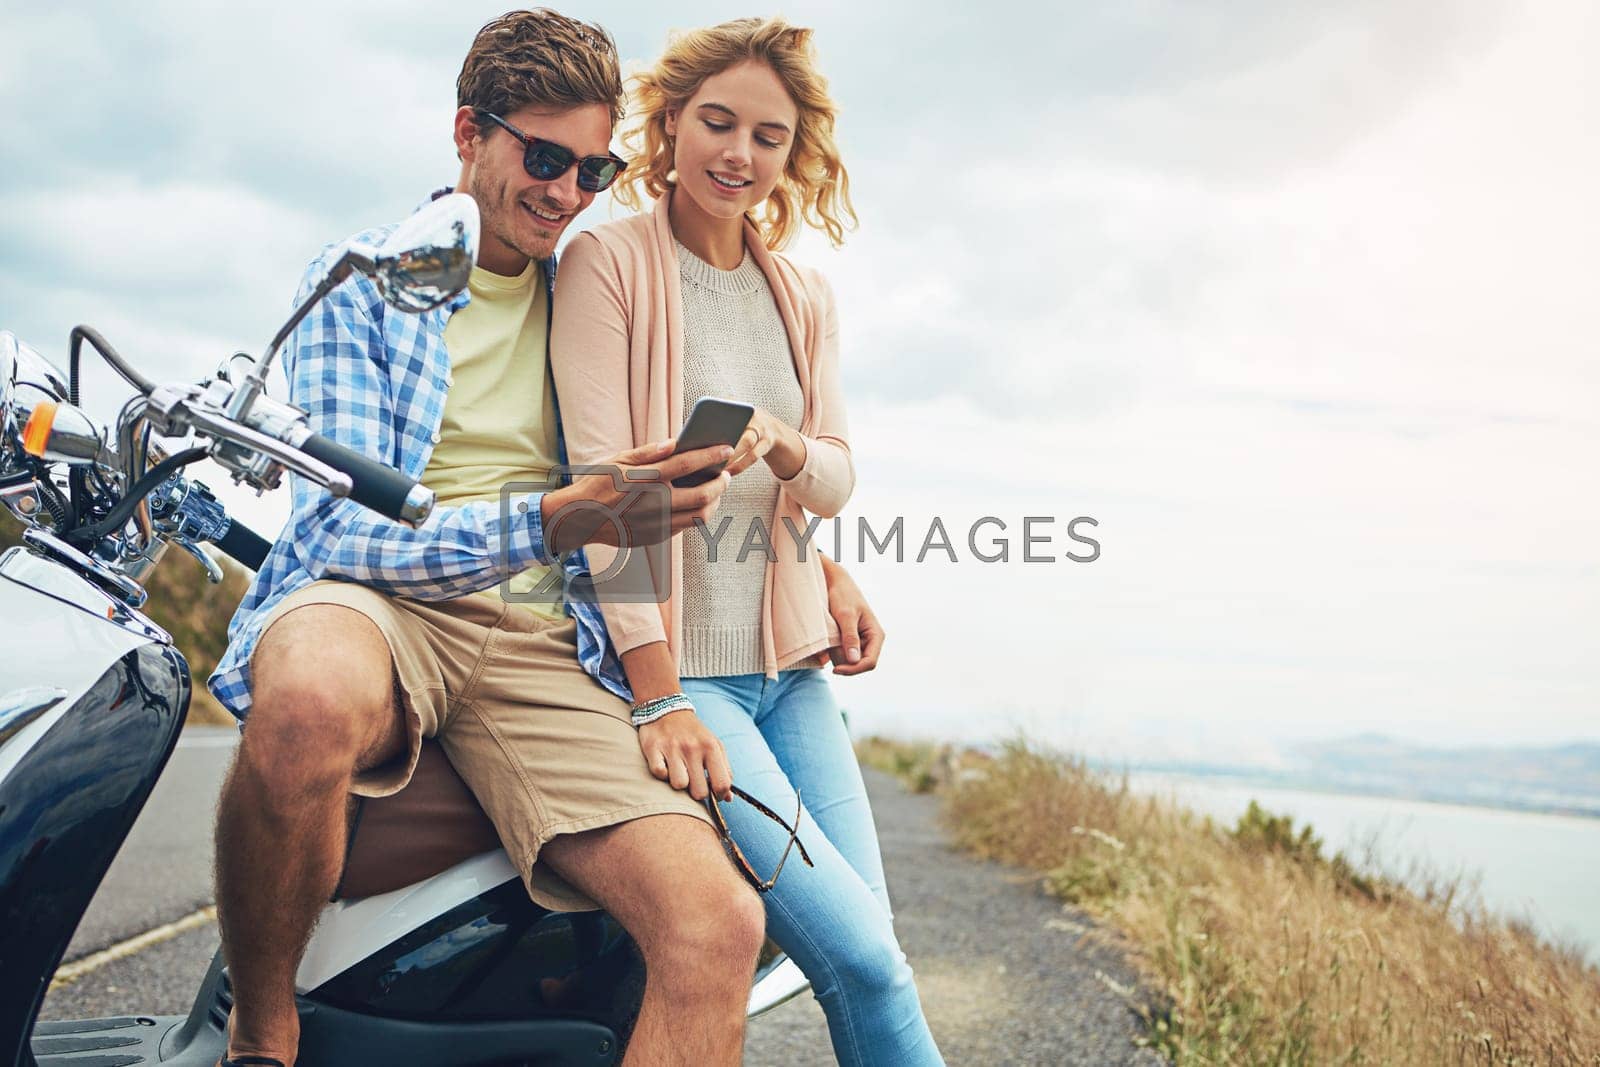 Royalty free image of Lifes a journey...why travel alone. a couple using a cellphone while taking a break from their road trip. by YuriArcurs